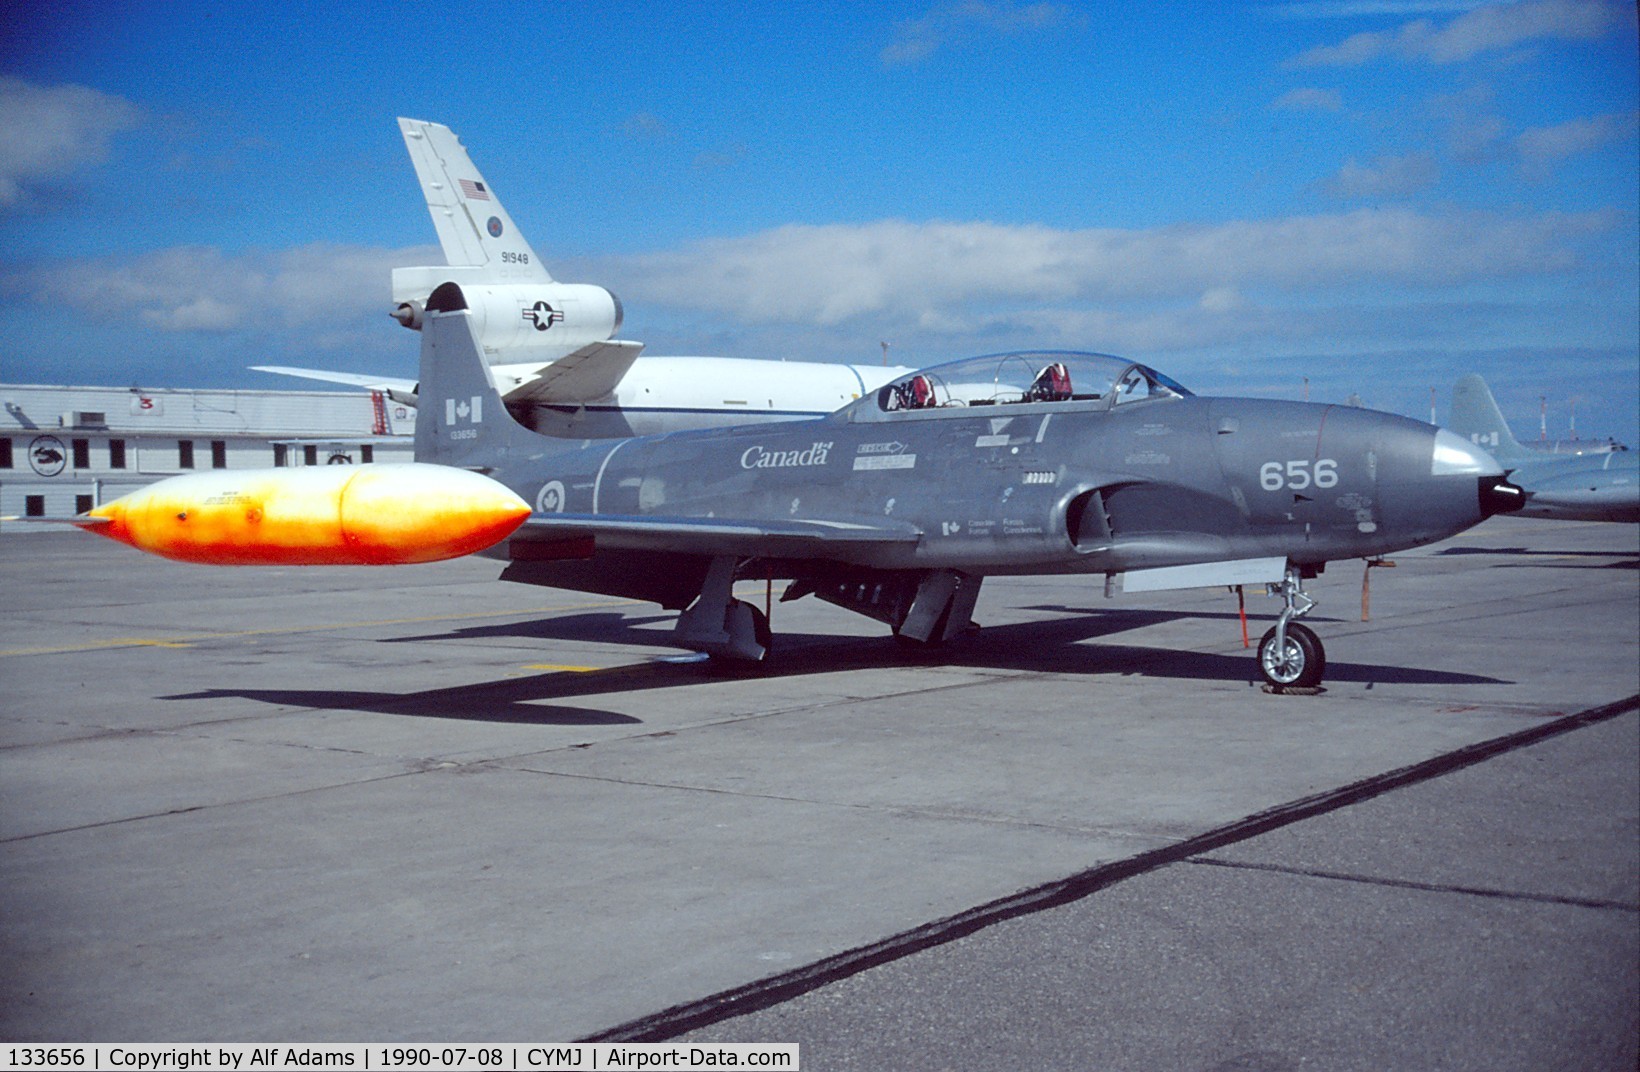 133656, 1959 Canadair CT-133 Silver Star 3 C/N T33-656, Displayed at the annual airshow at Canadian Forces Base Moose Jaw, Saskatchewan, Canada in 1990.